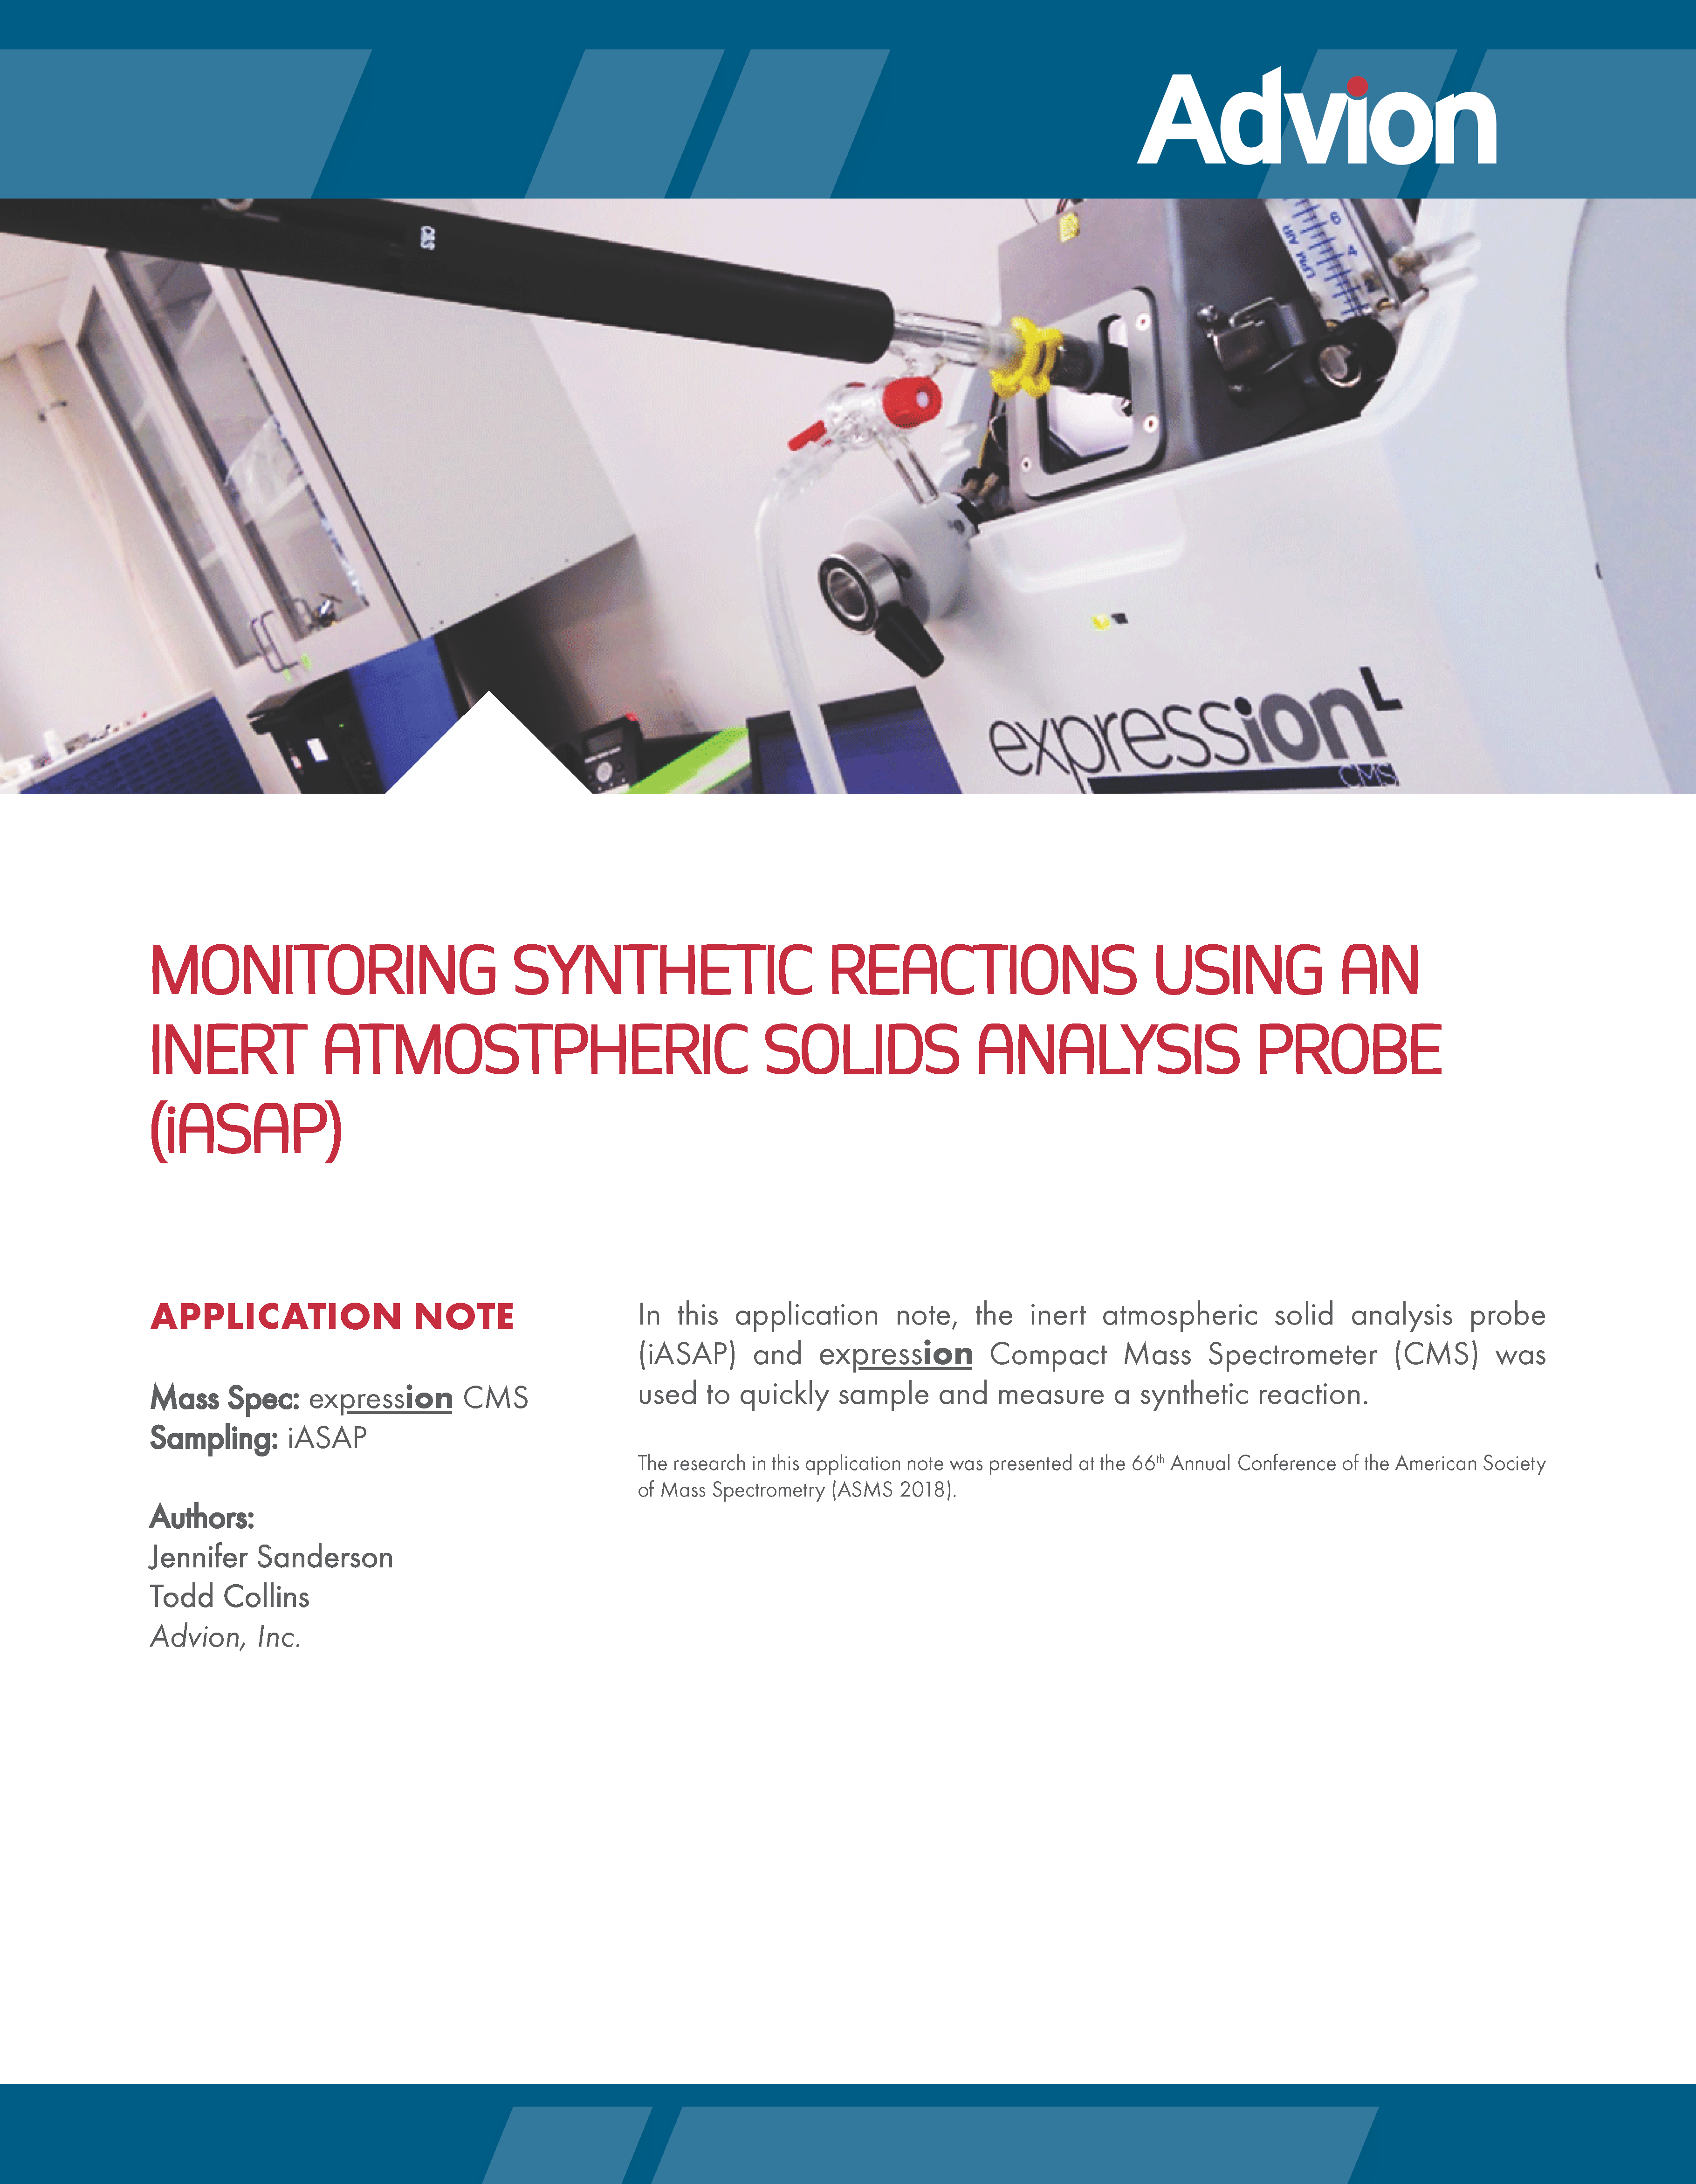 Monitoring Synthetic Reactions Using an inert Atmospheric Solids Analysis Probe (iASAP)